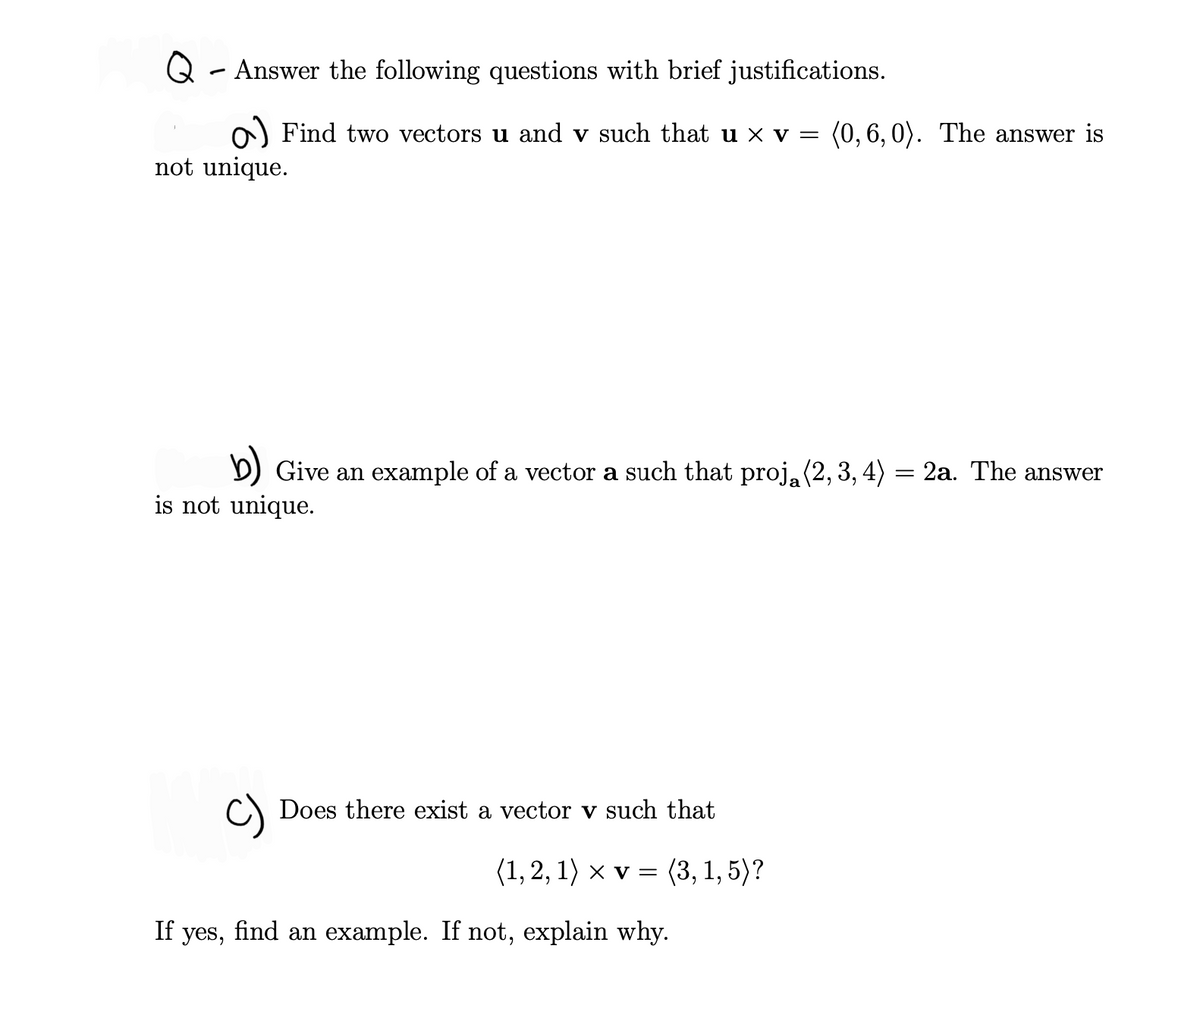 Q - Answer the following questions with brief justifications.
o) Find two vectors u and v such that u × v = (0,6, 0). The answer is
not unique.
b) Give an example of a vector a such that proj, (2, 3, 4) = 2a. The answer
is not unique.
C) Does there exist a vector v such that
(1, 2, 1) x v = (3, 1,5)?
If yes, find an example. If not, explain why.